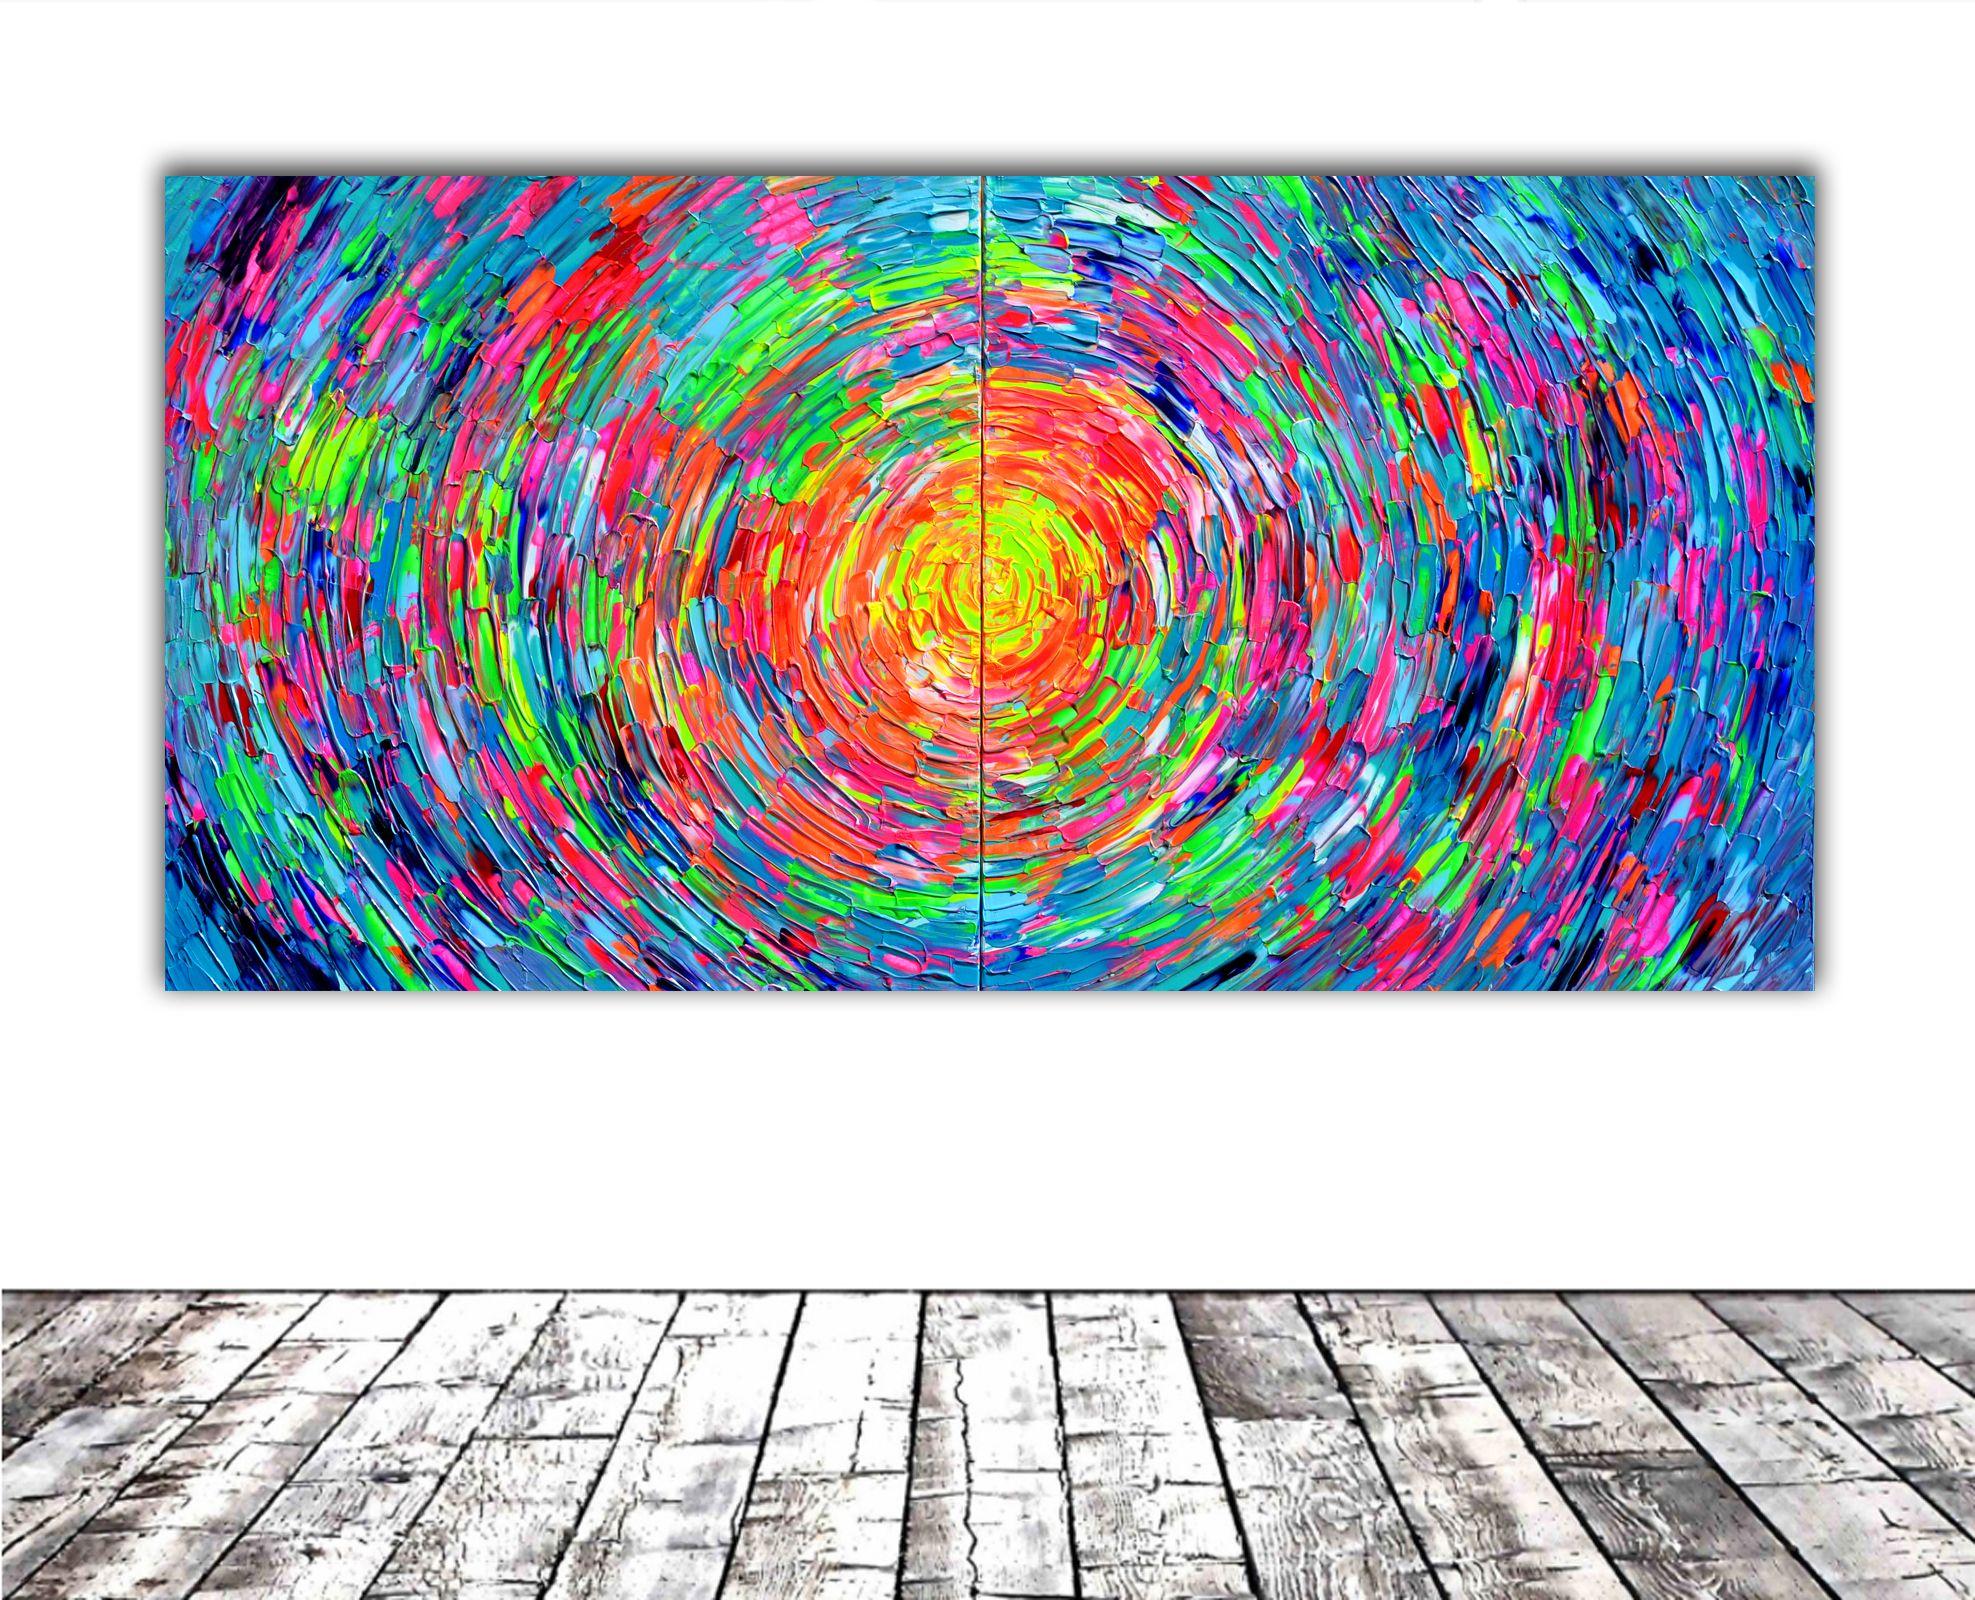 READY TO HANG - Diptych - GALLERY QUALITY  Vibrant, vivid, dynamic, bold large colourful abstract painting - some neon nuances could not be caught by the camera.  Dimensions: 200x100X4 cm - 78.8x39.4x1.6 inches; 2 PCS of 100x100x4 cm or